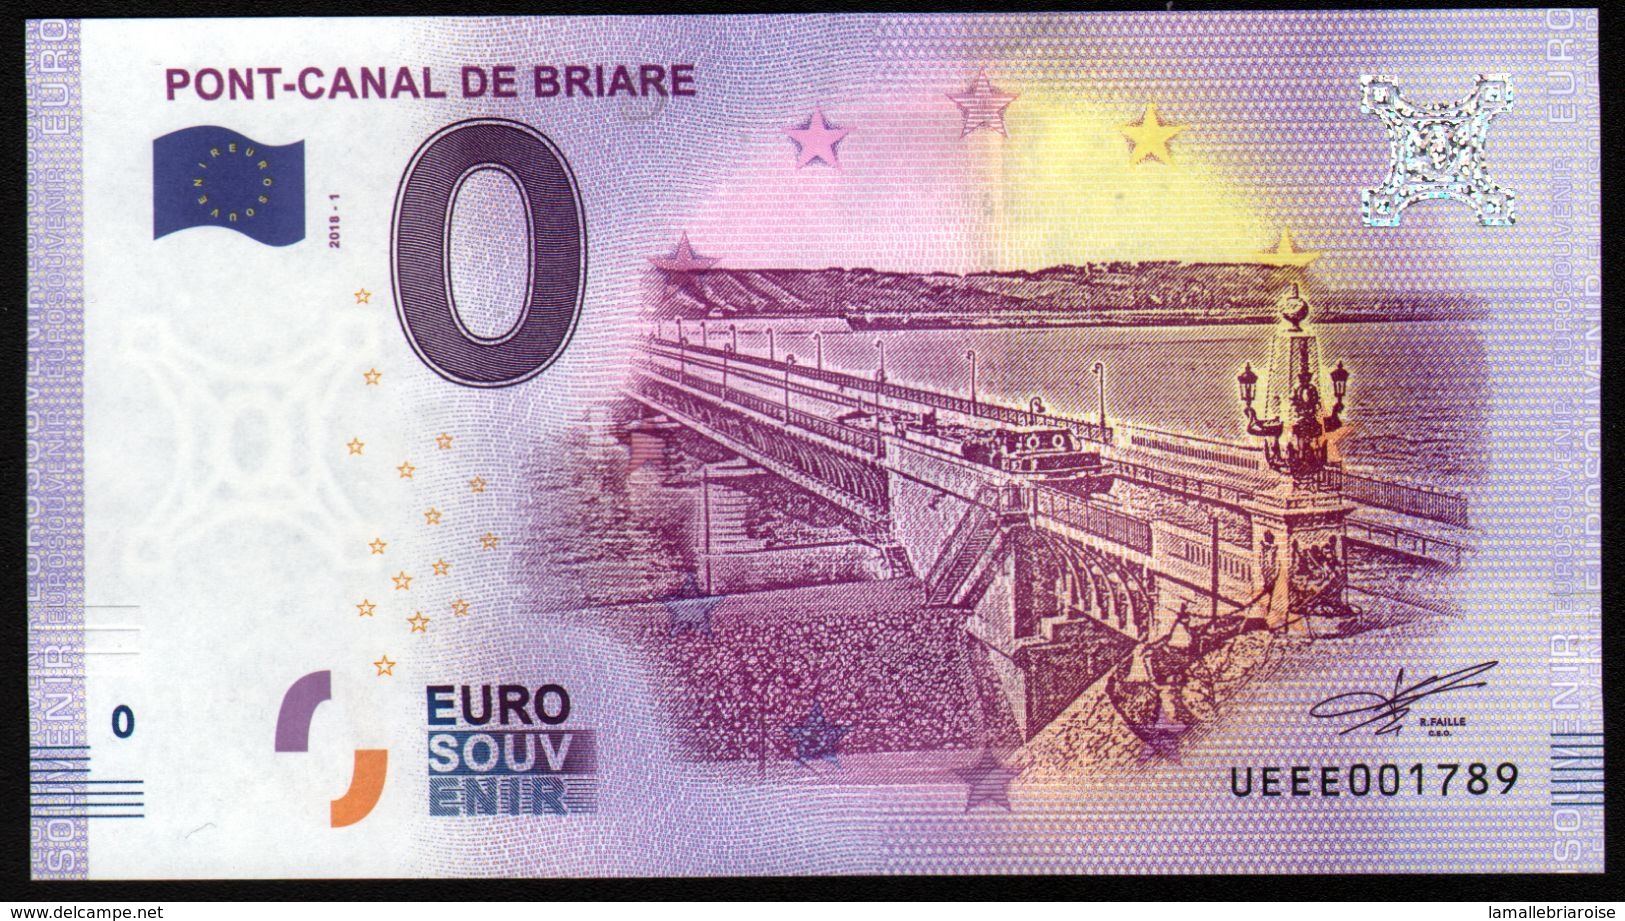 France - Billet Touristique 0 Euro 2018 N°001789 (UEEE003300/5000) - PONT-CANAL DE BRIARE - Private Proofs / Unofficial